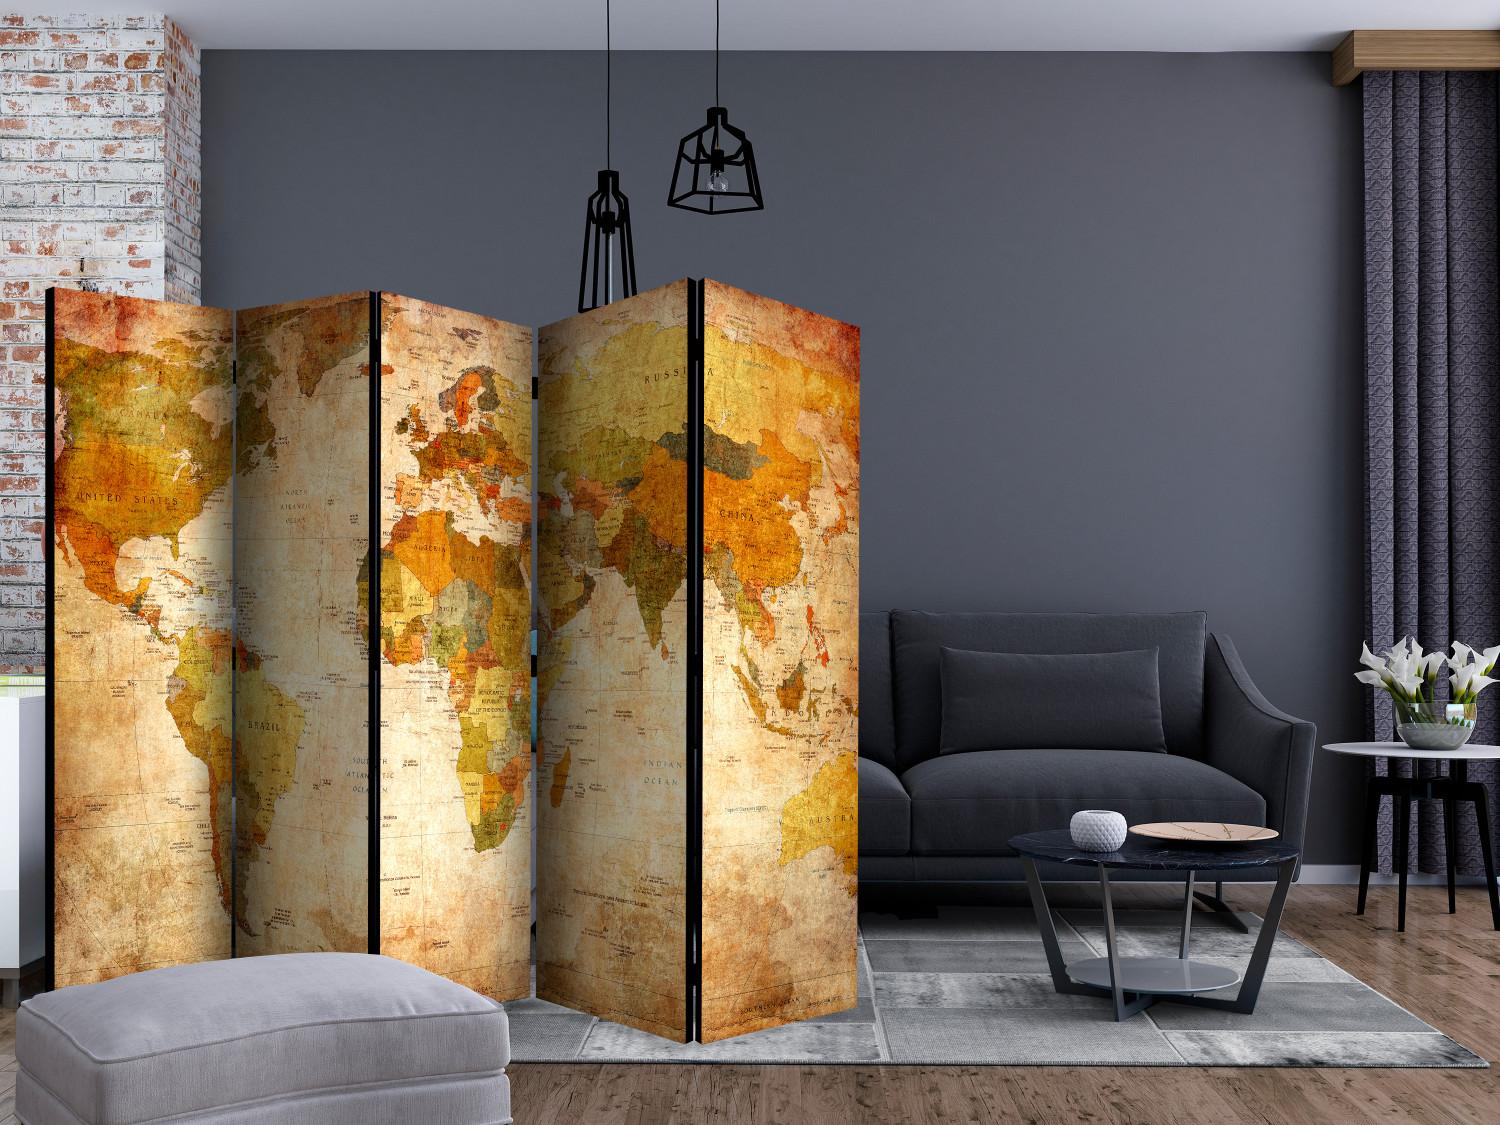 Room Divider In All Its Glory II (5-piece) - retro-styled world map